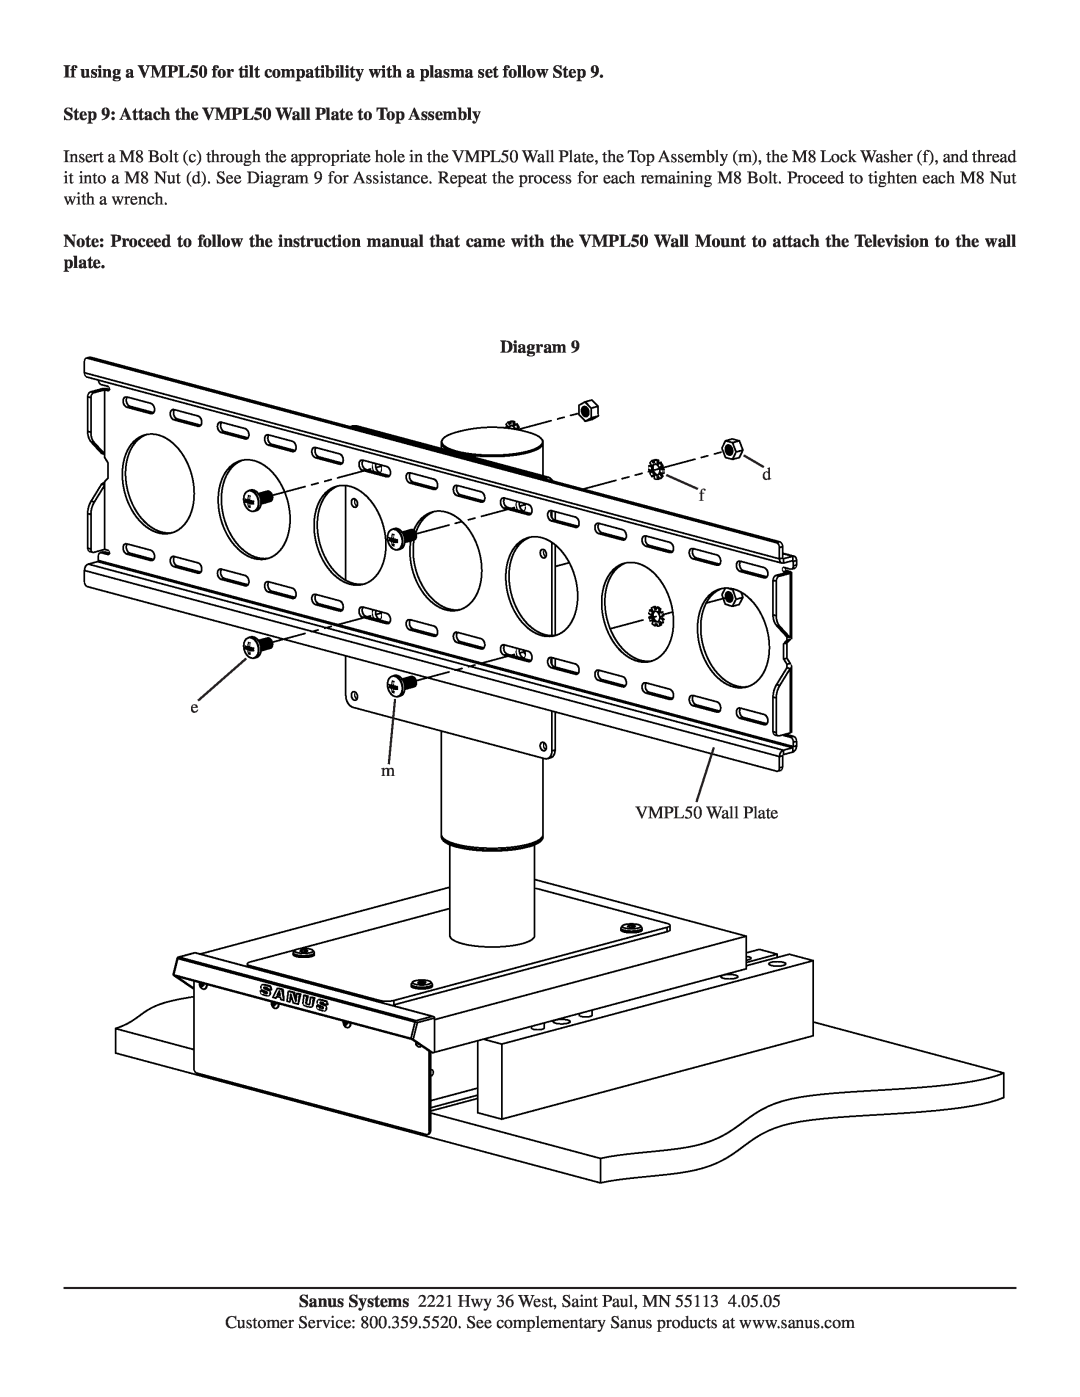 Sanus Systems VMPO manual If using a VMPL50 for tilt compatibility with a plasma set follow Step 